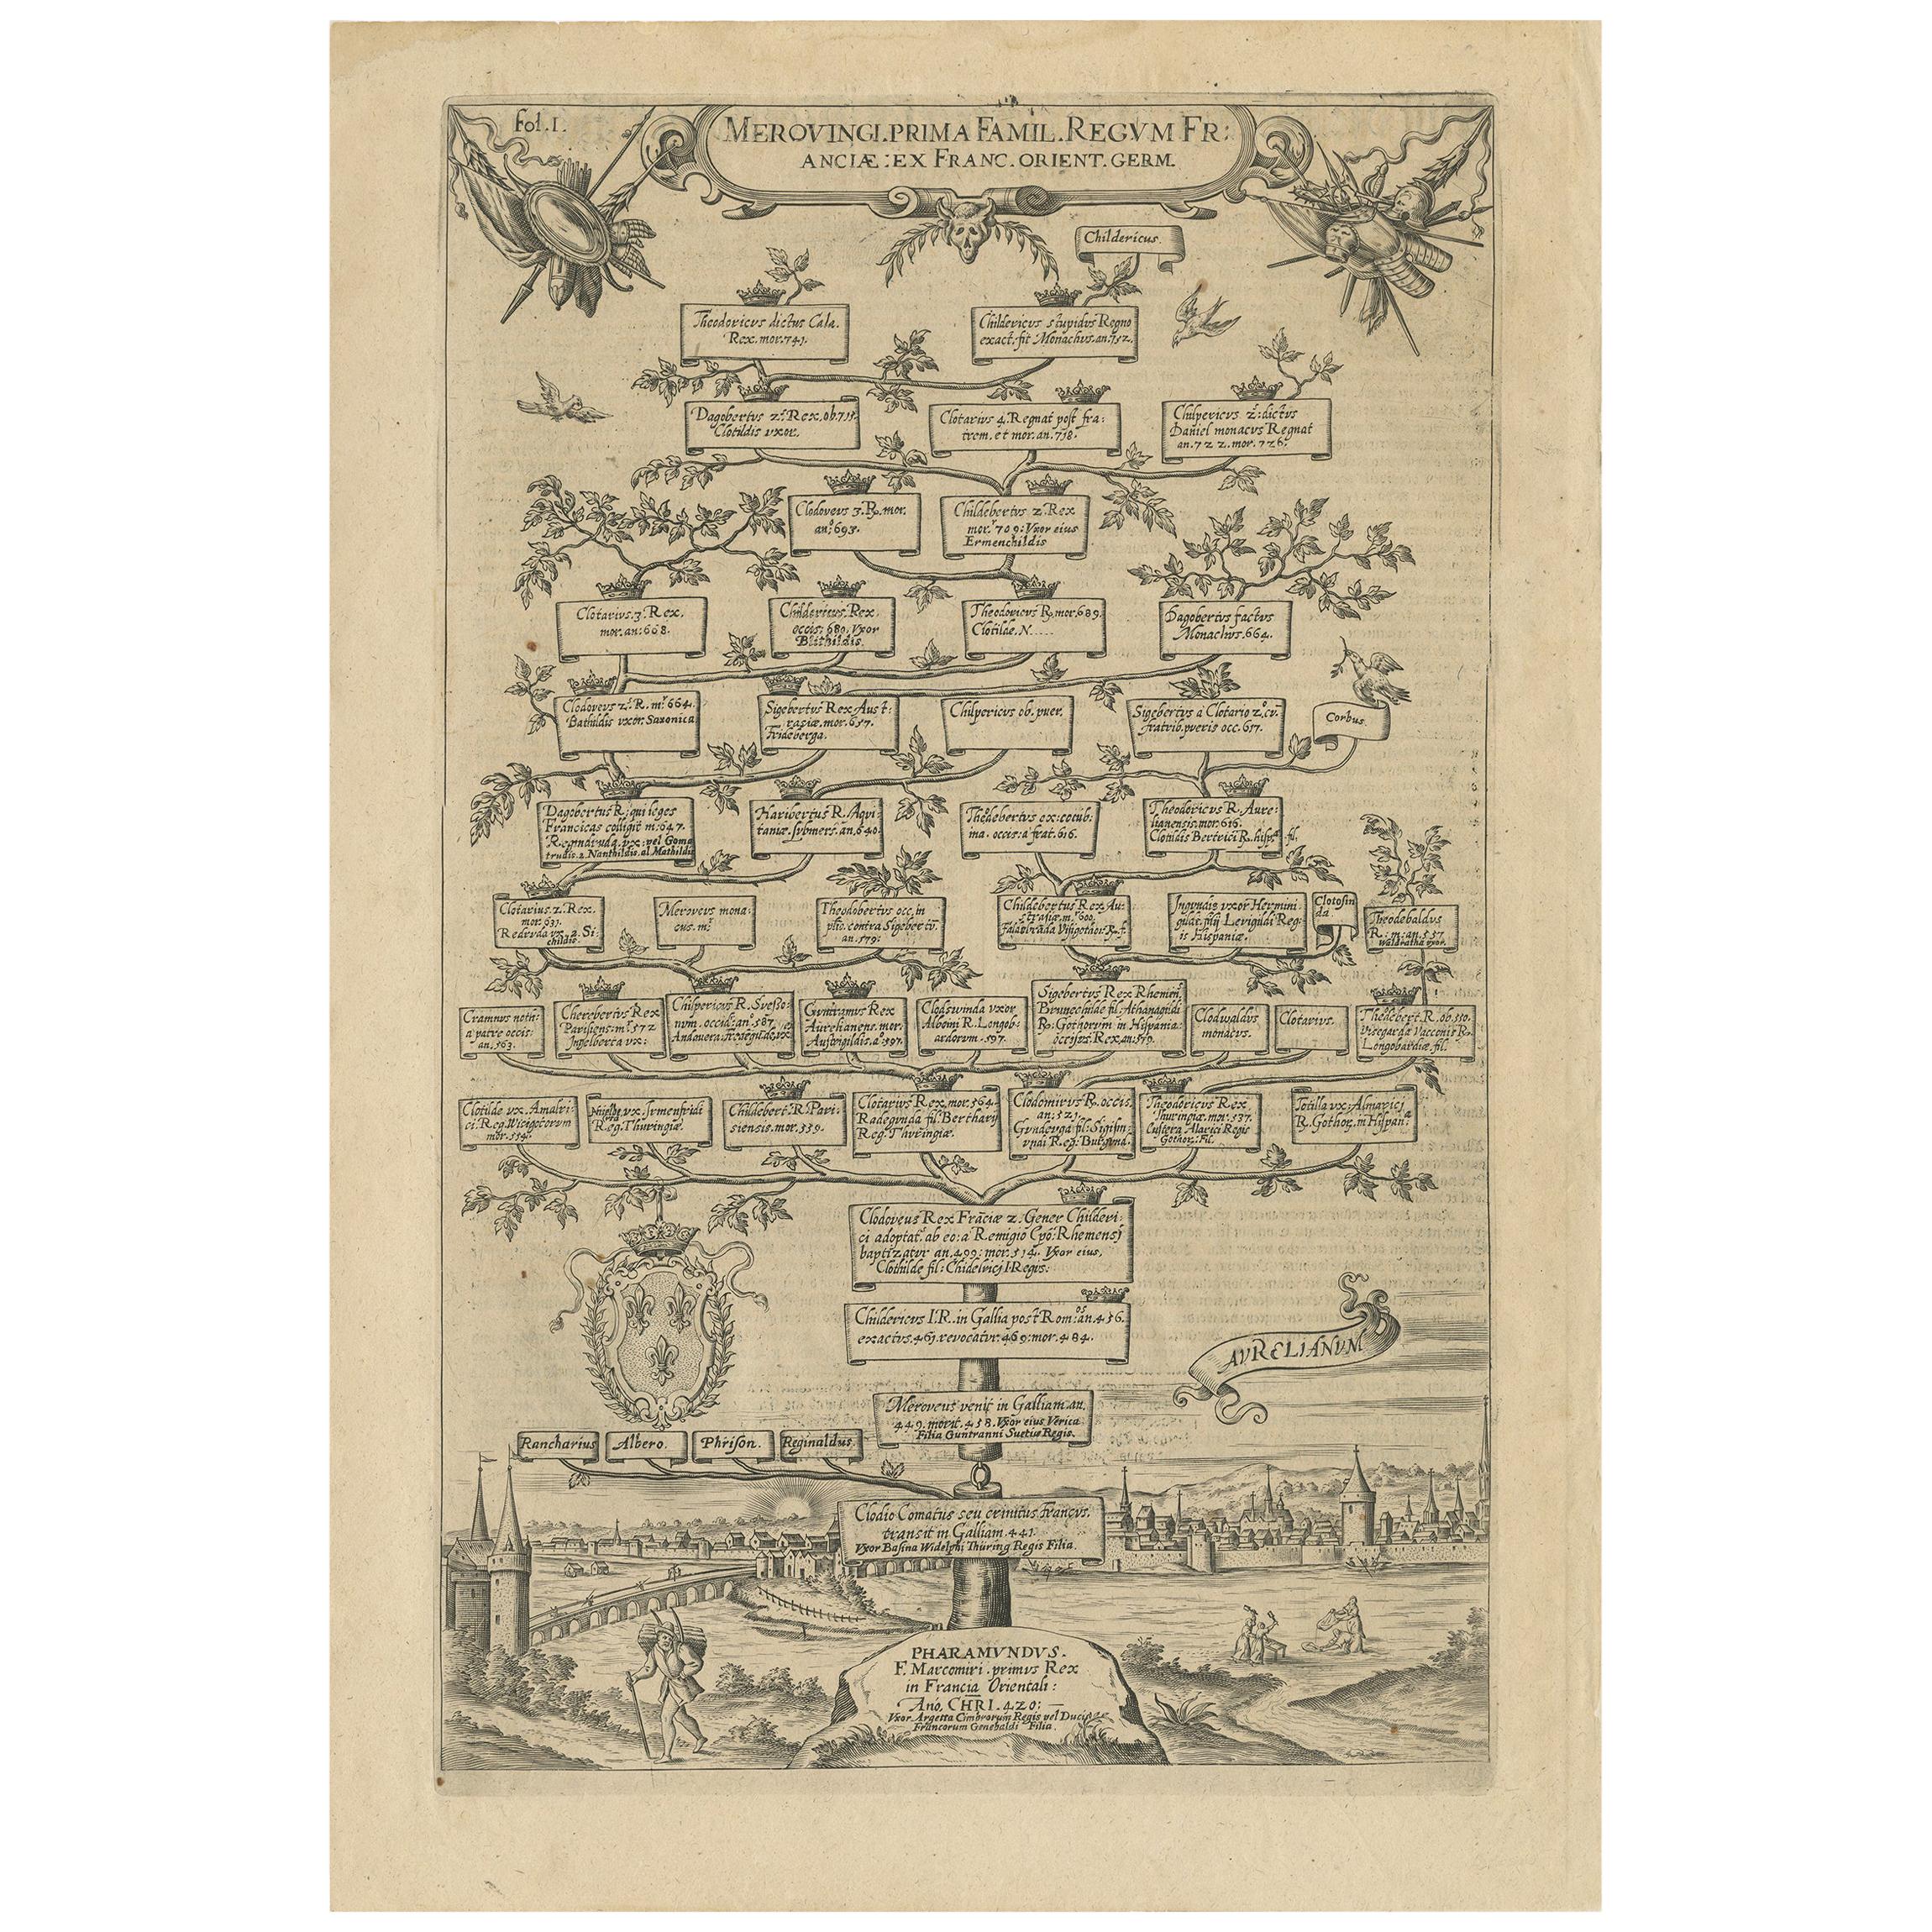 Antique Print with a Family Tree of the Merovingian Kings of France 'circa 1627'